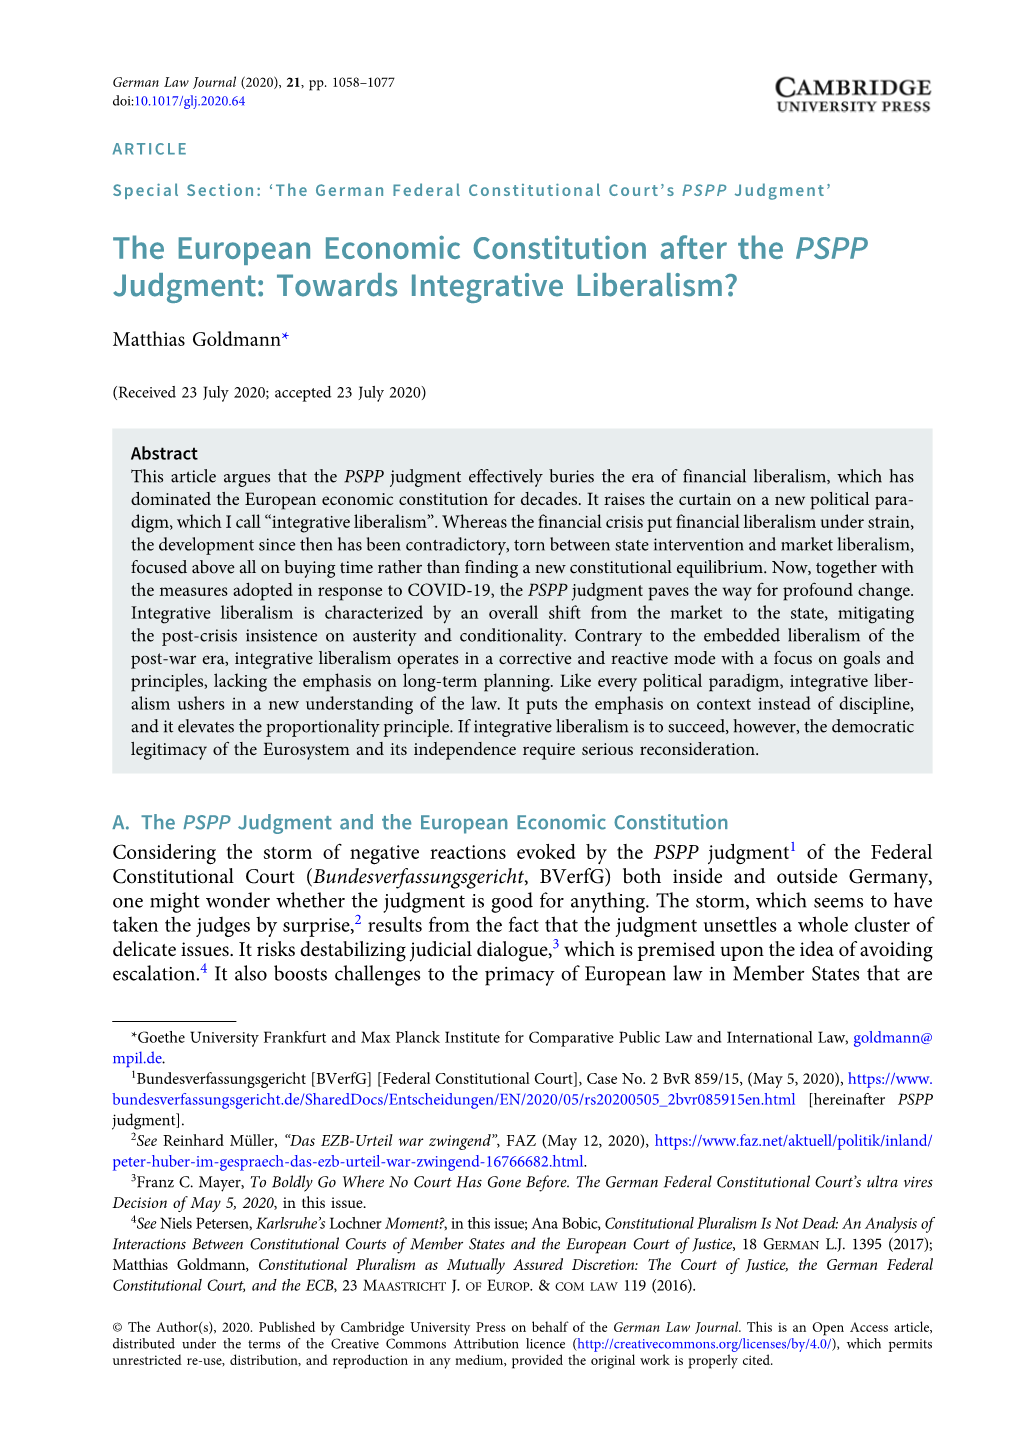 The European Economic Constitution After the PSPP Judgment: Towards Integrative Liberalism?